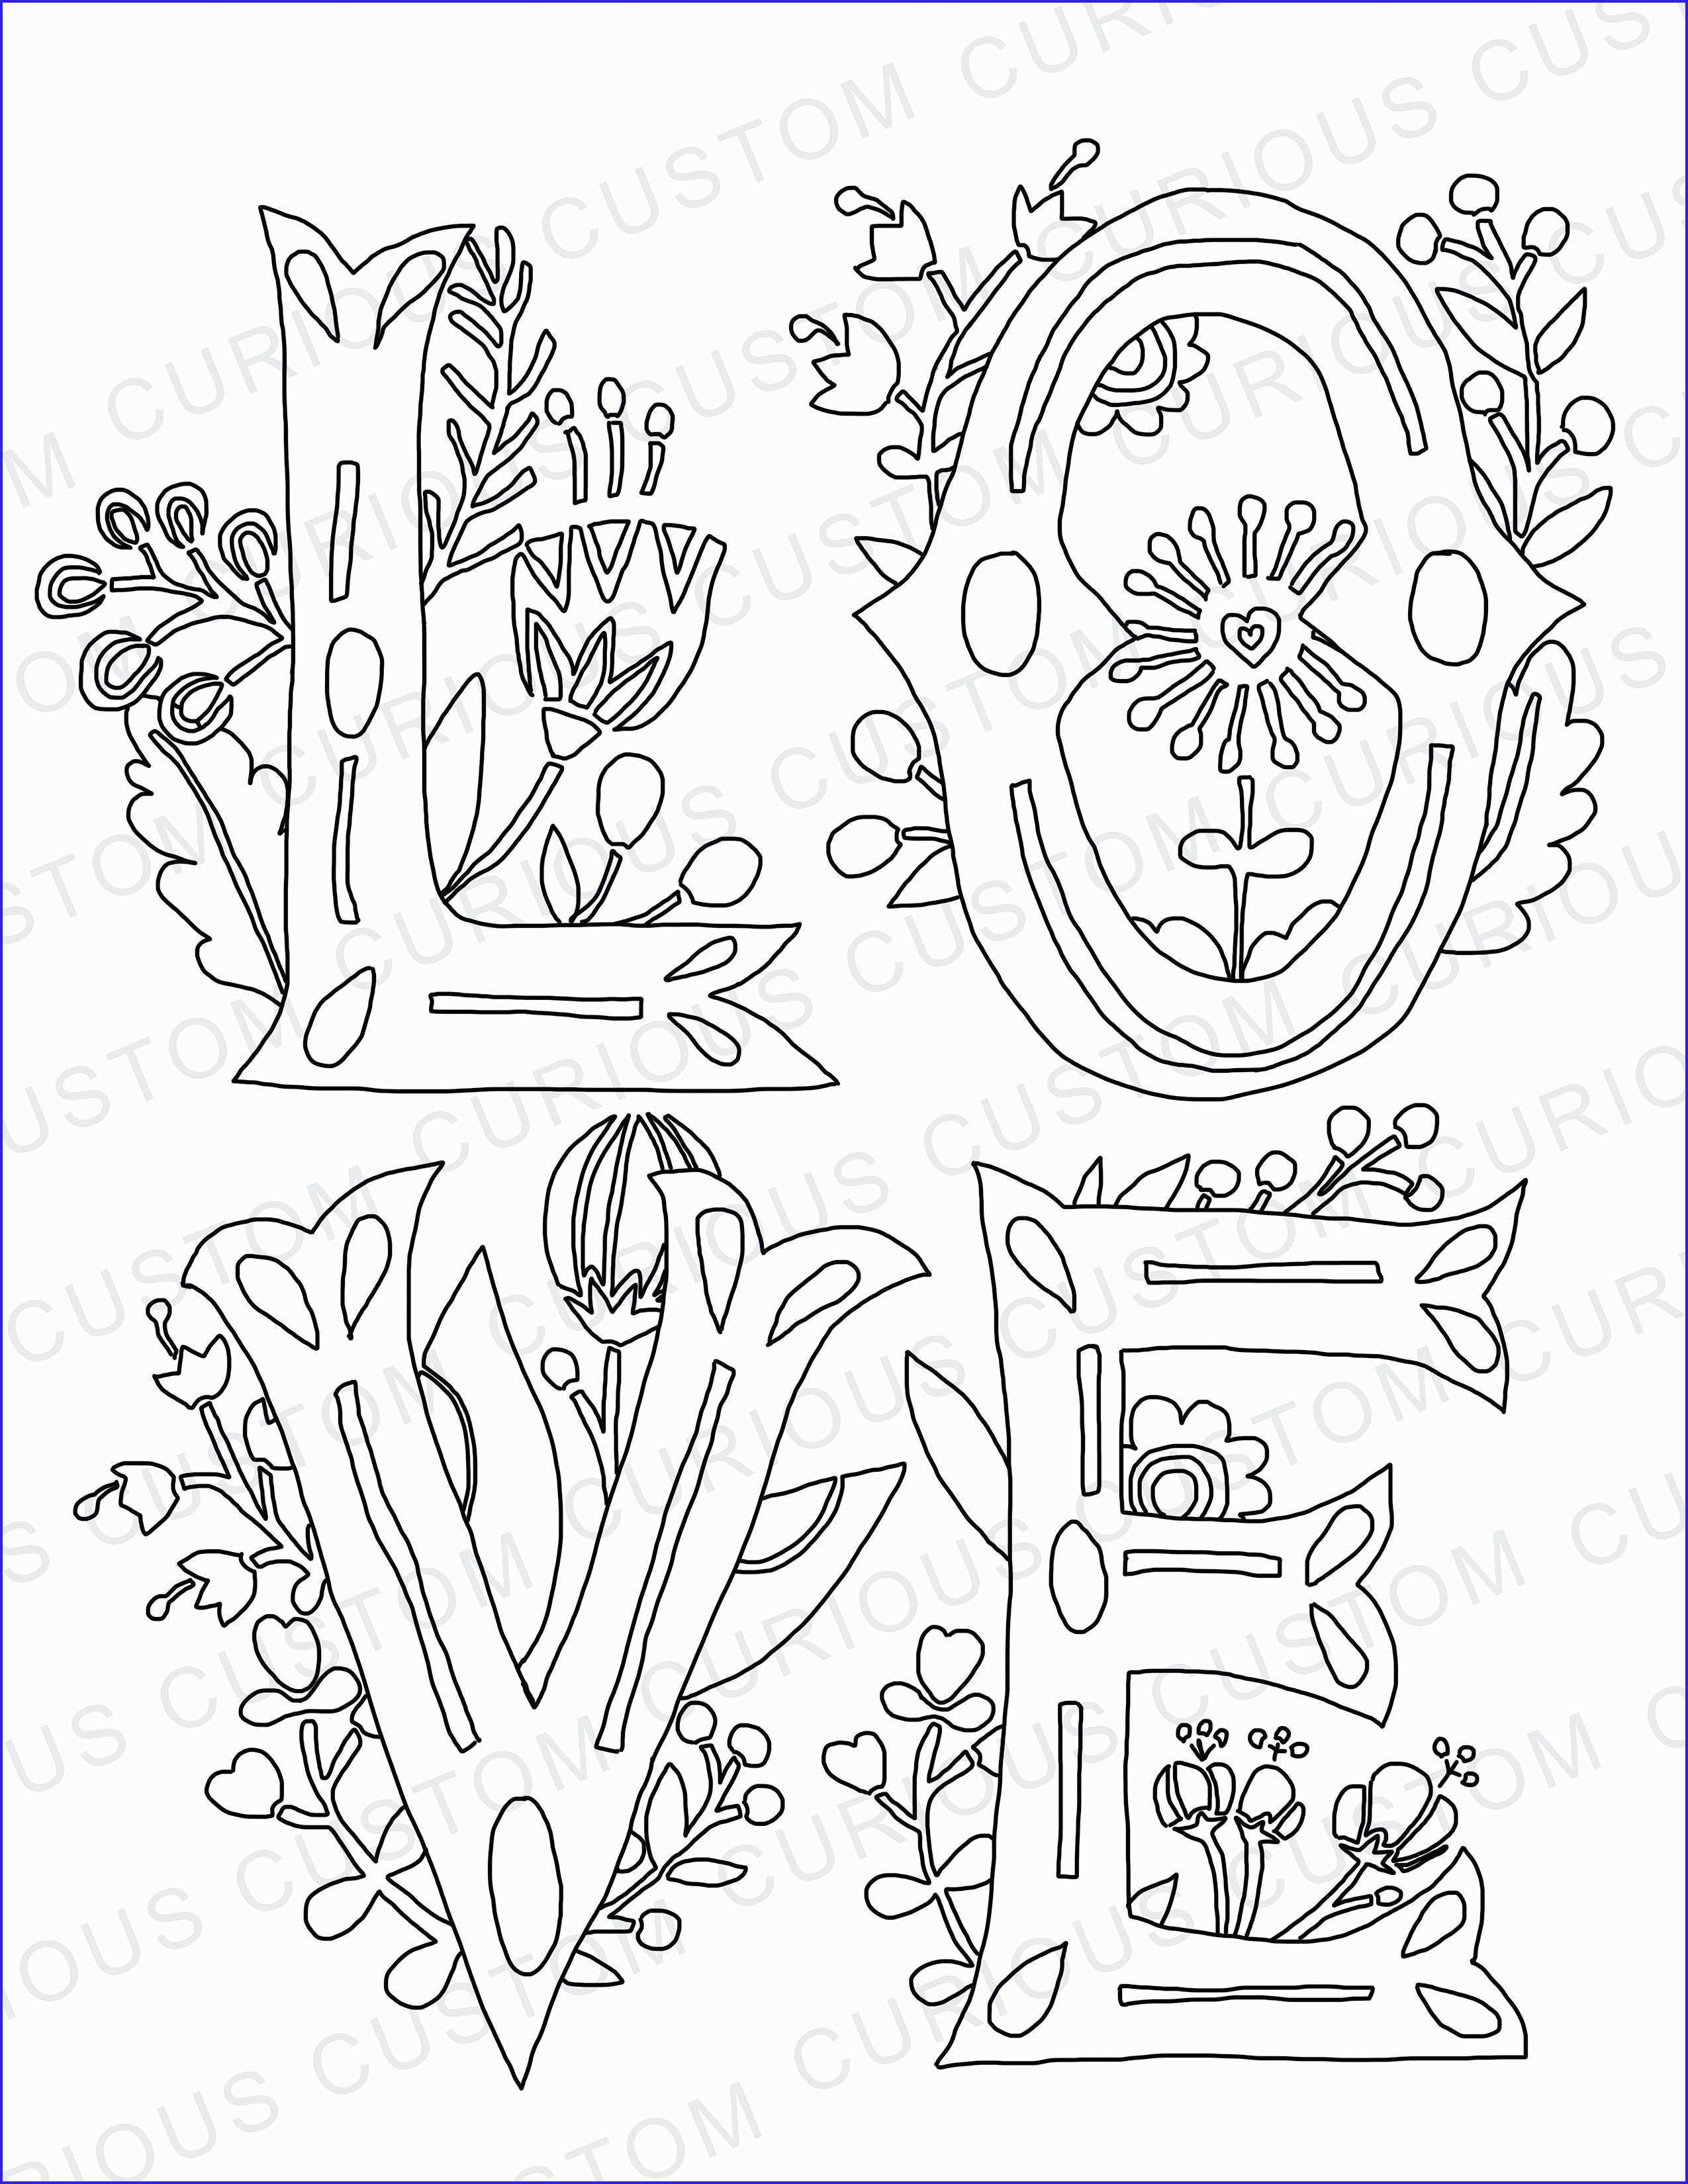 Free Custom Coloring Pages Coloring Pages Free Coloring Pages For Kids Printable Ba Names